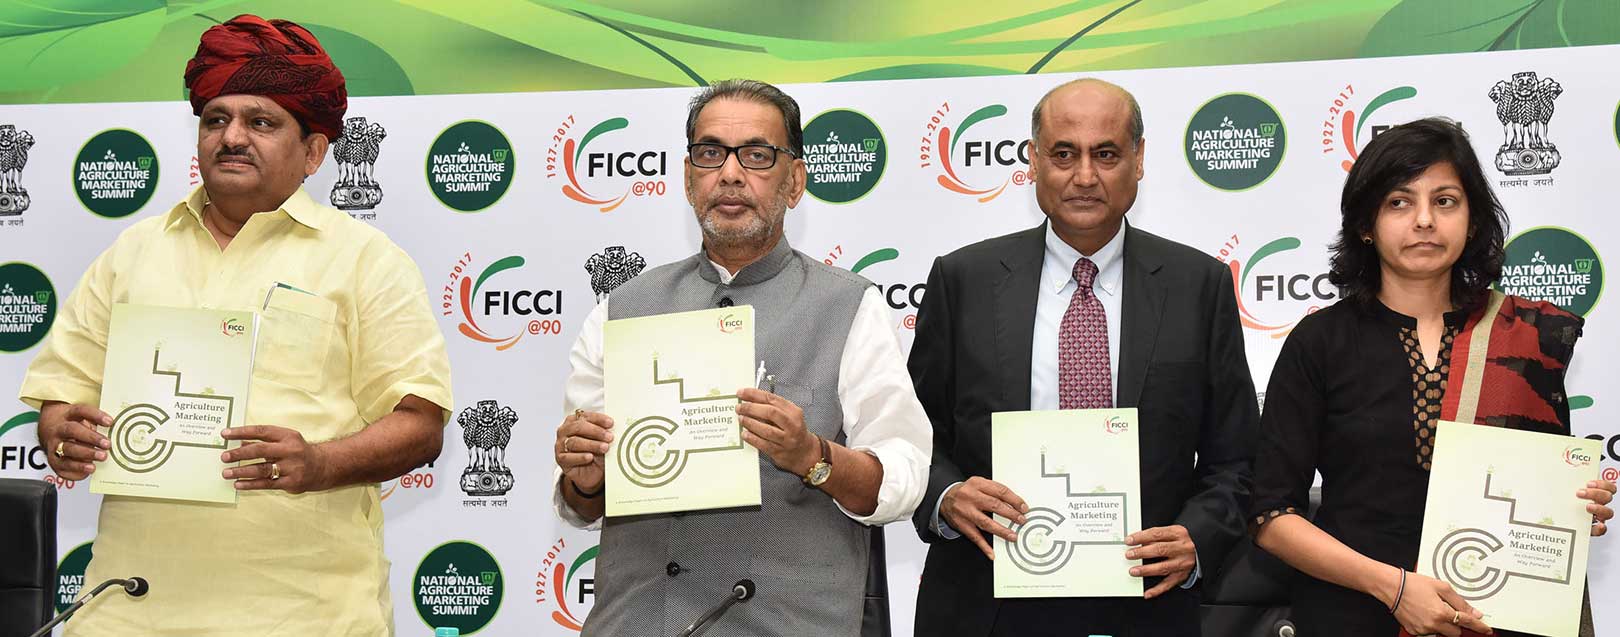 Record production of food grains in India in 2016-17: Radha Mohan Singh 